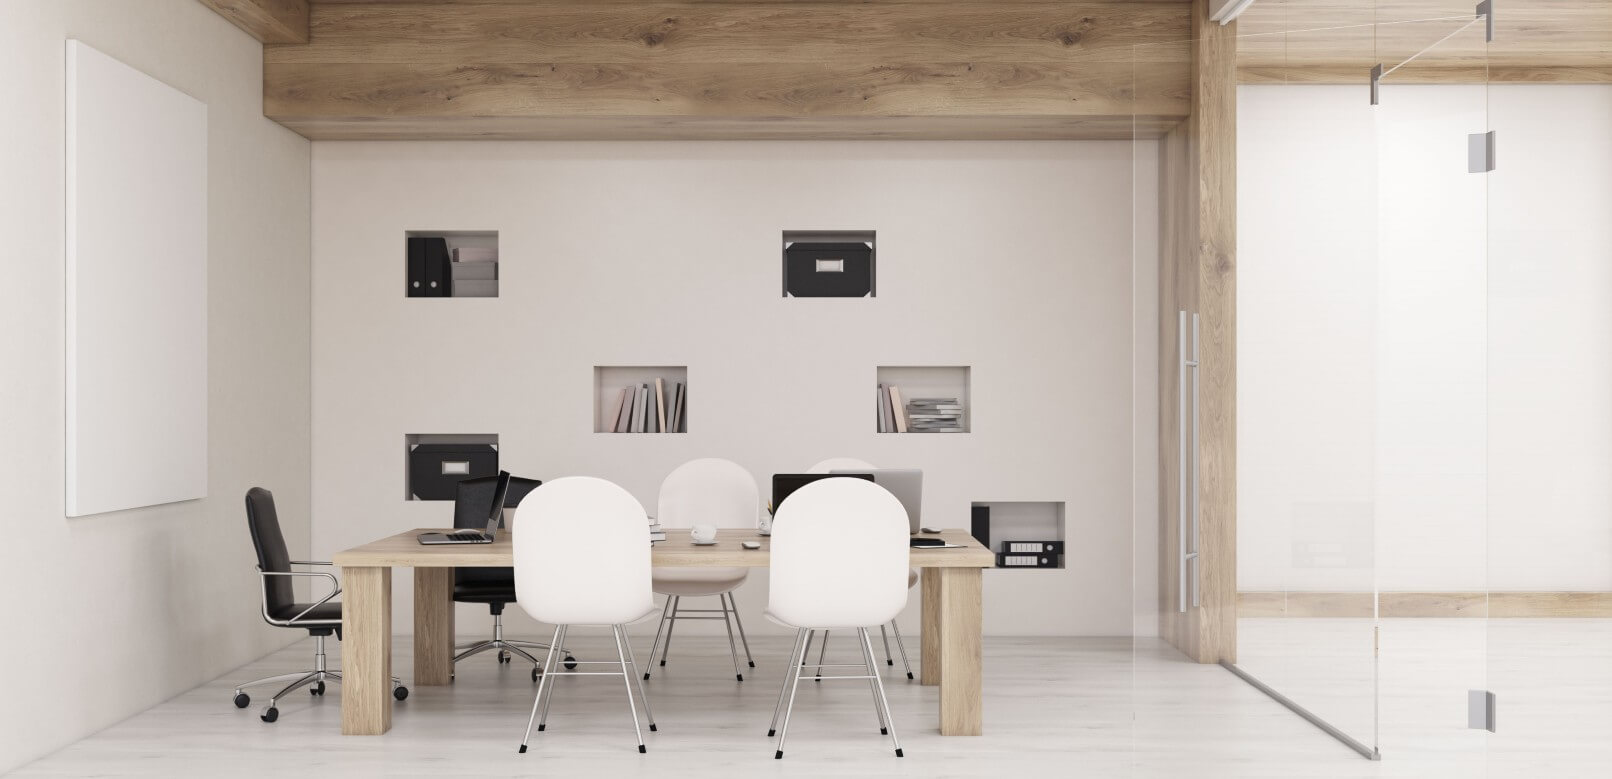 Modern office meeting room with wall mounted infrared panel mounted on left hand wall